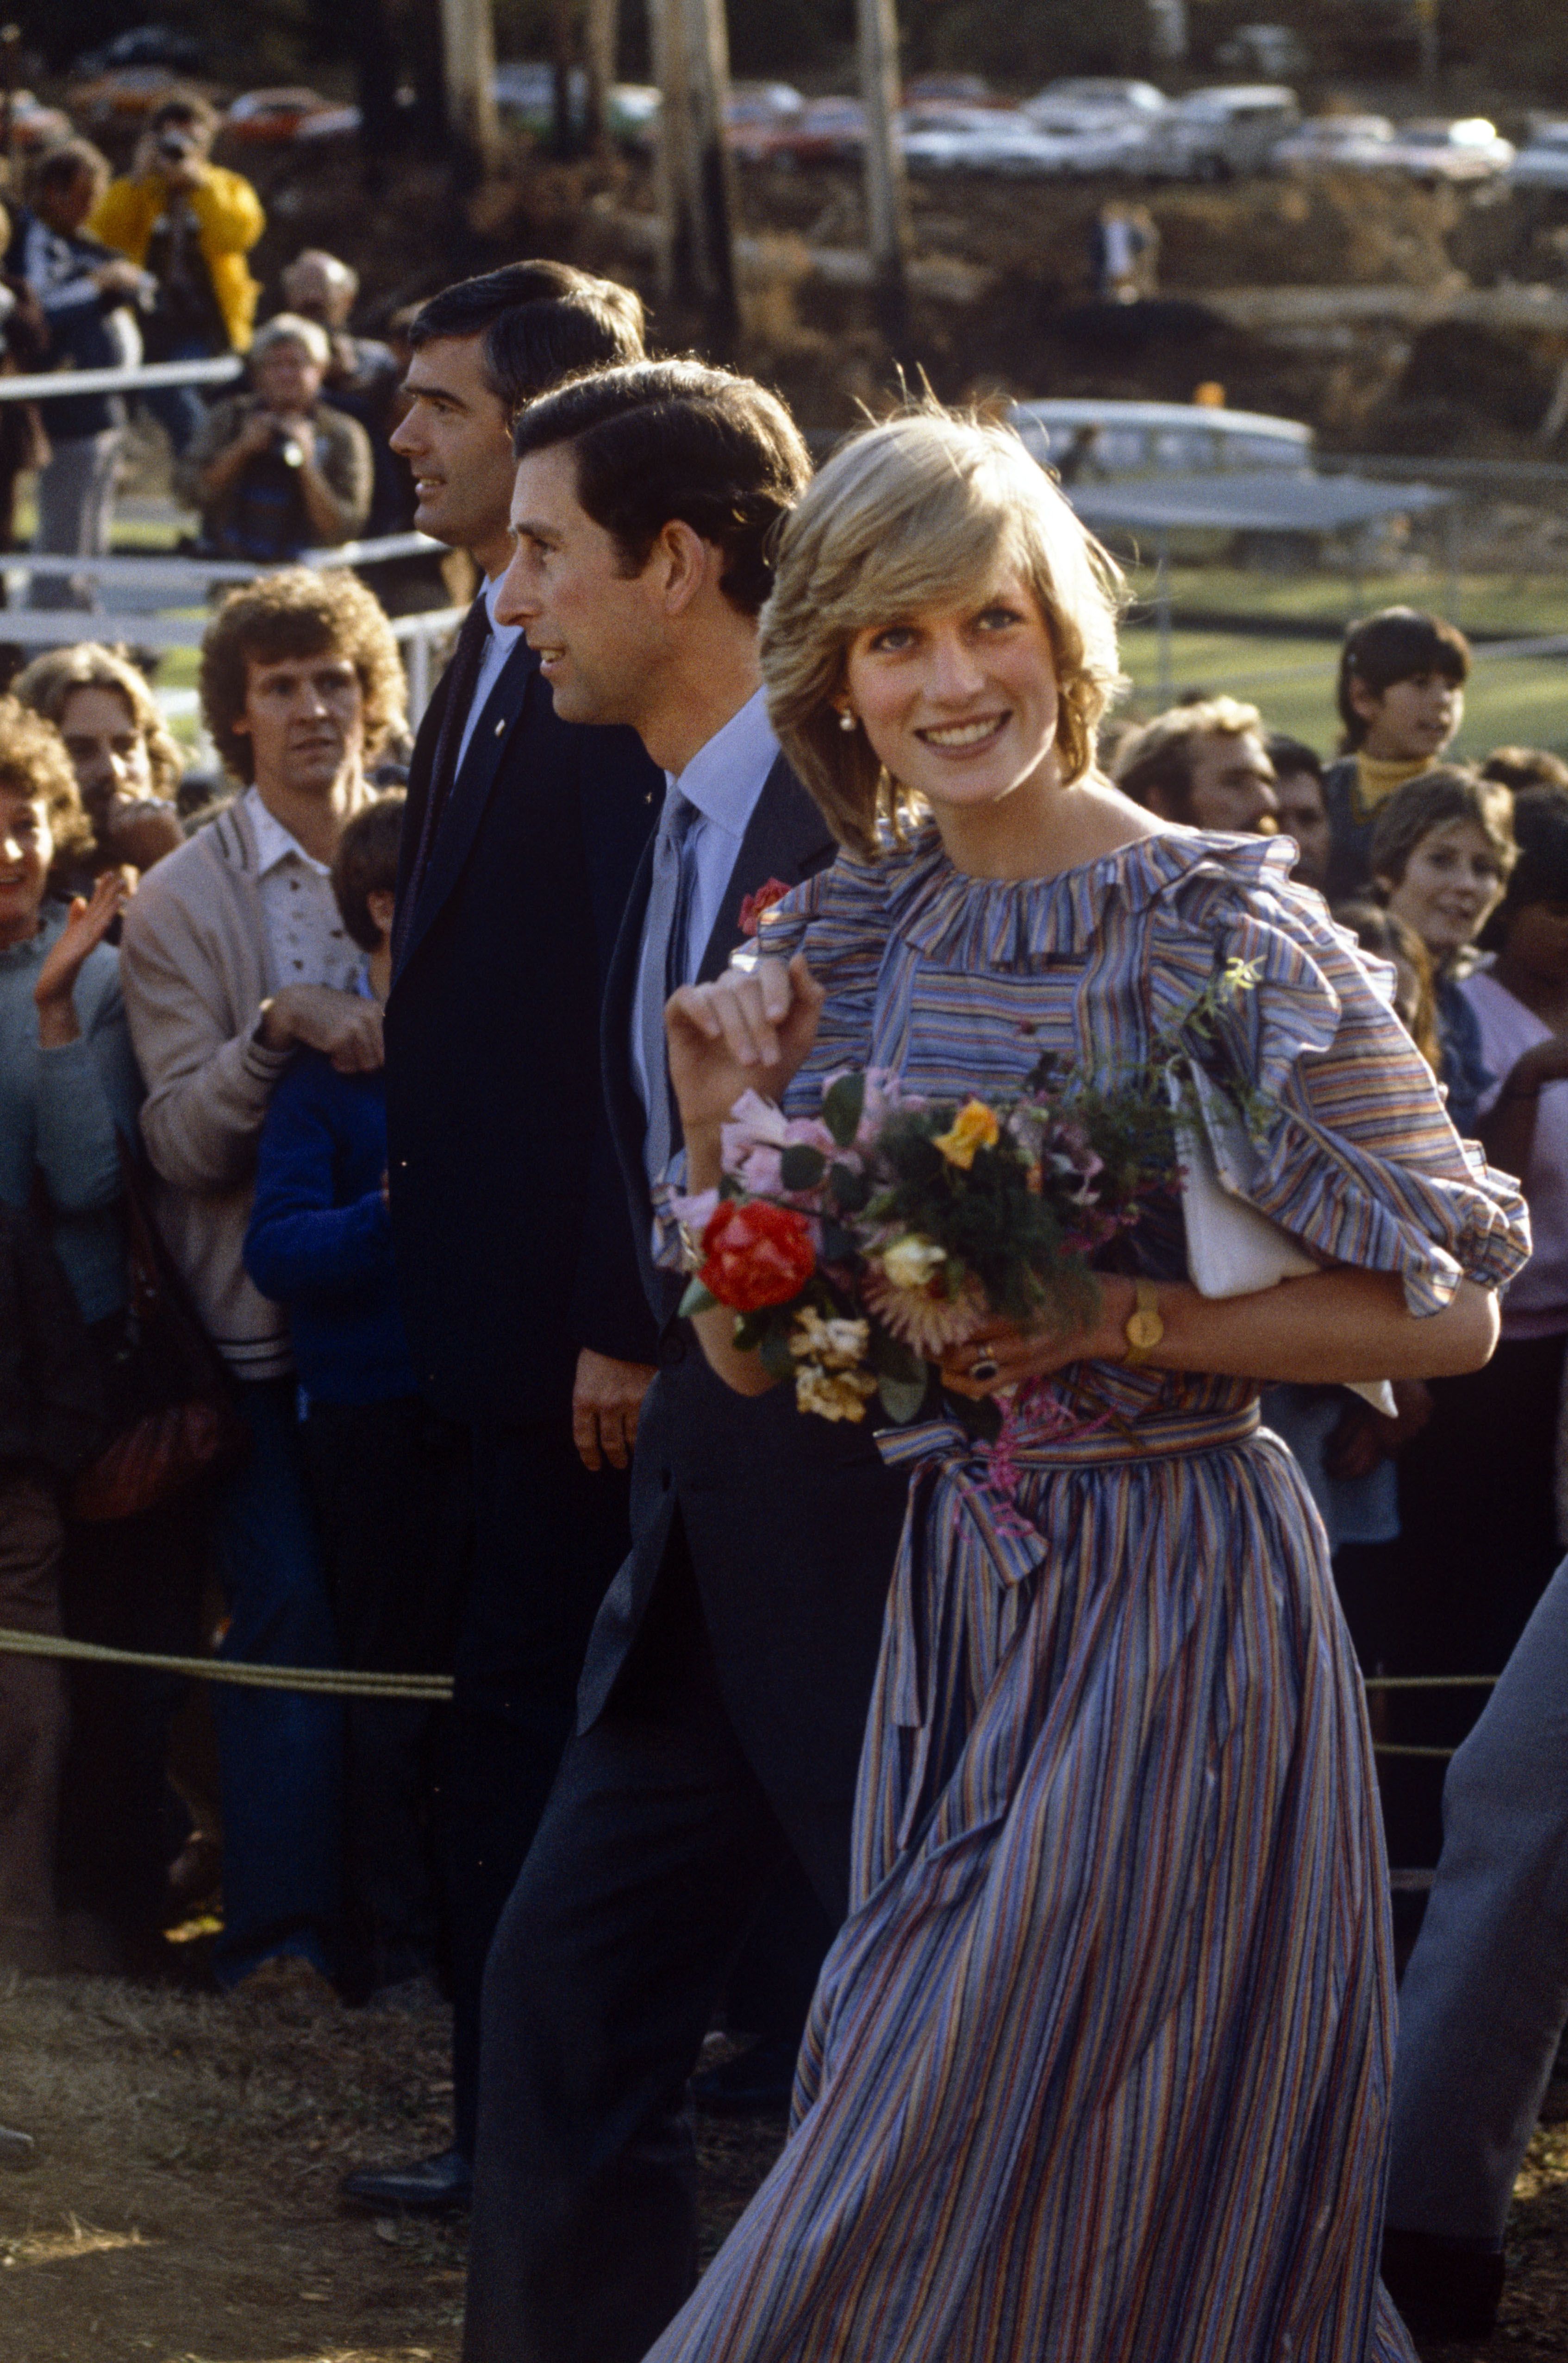 Princess Diana's Best Fashion - Diana's Most Iconic Style Moments